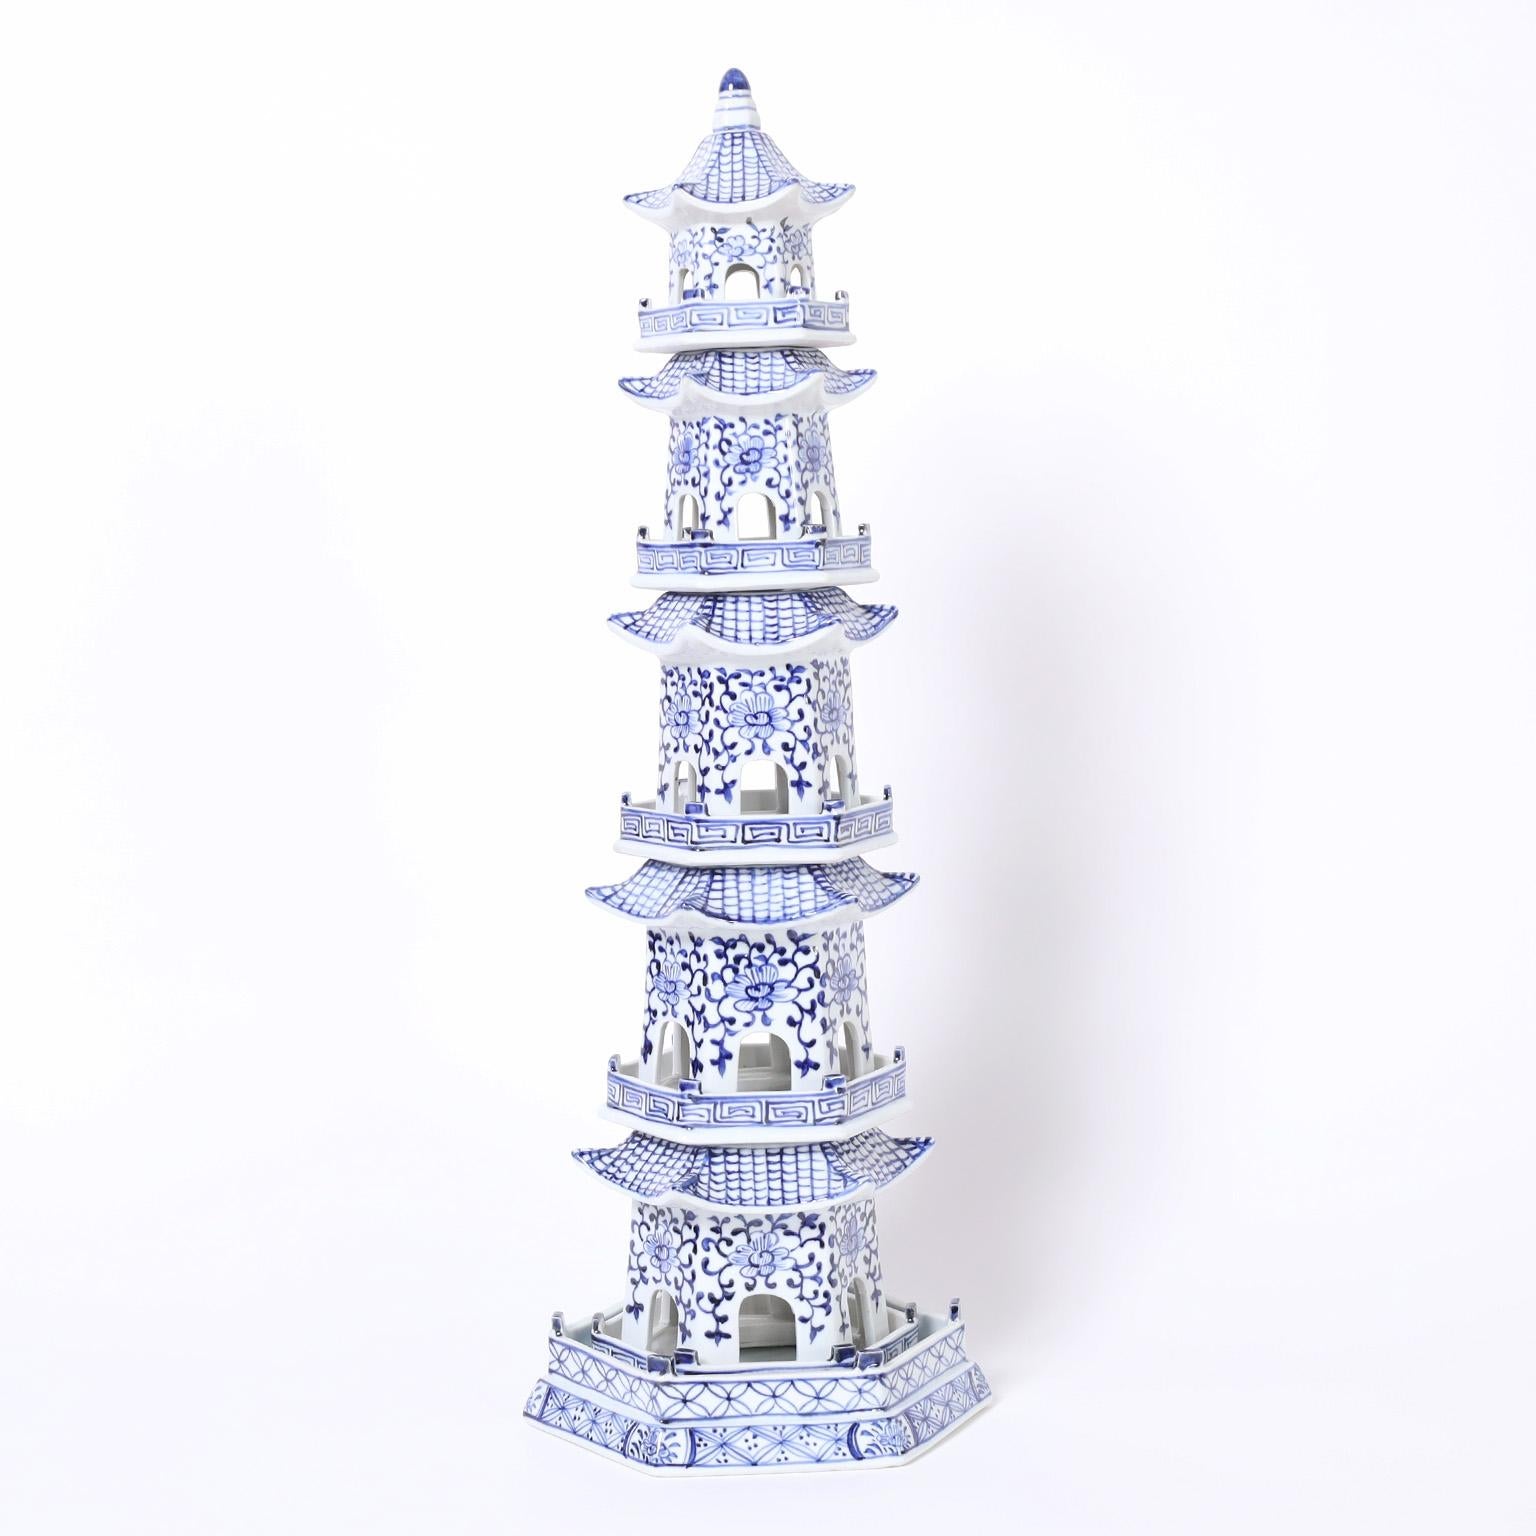 Impressive pair of architecturally dramatic Chinese blue and white porcelain pagoda towers each crafted with six hand decorated separate pieces.